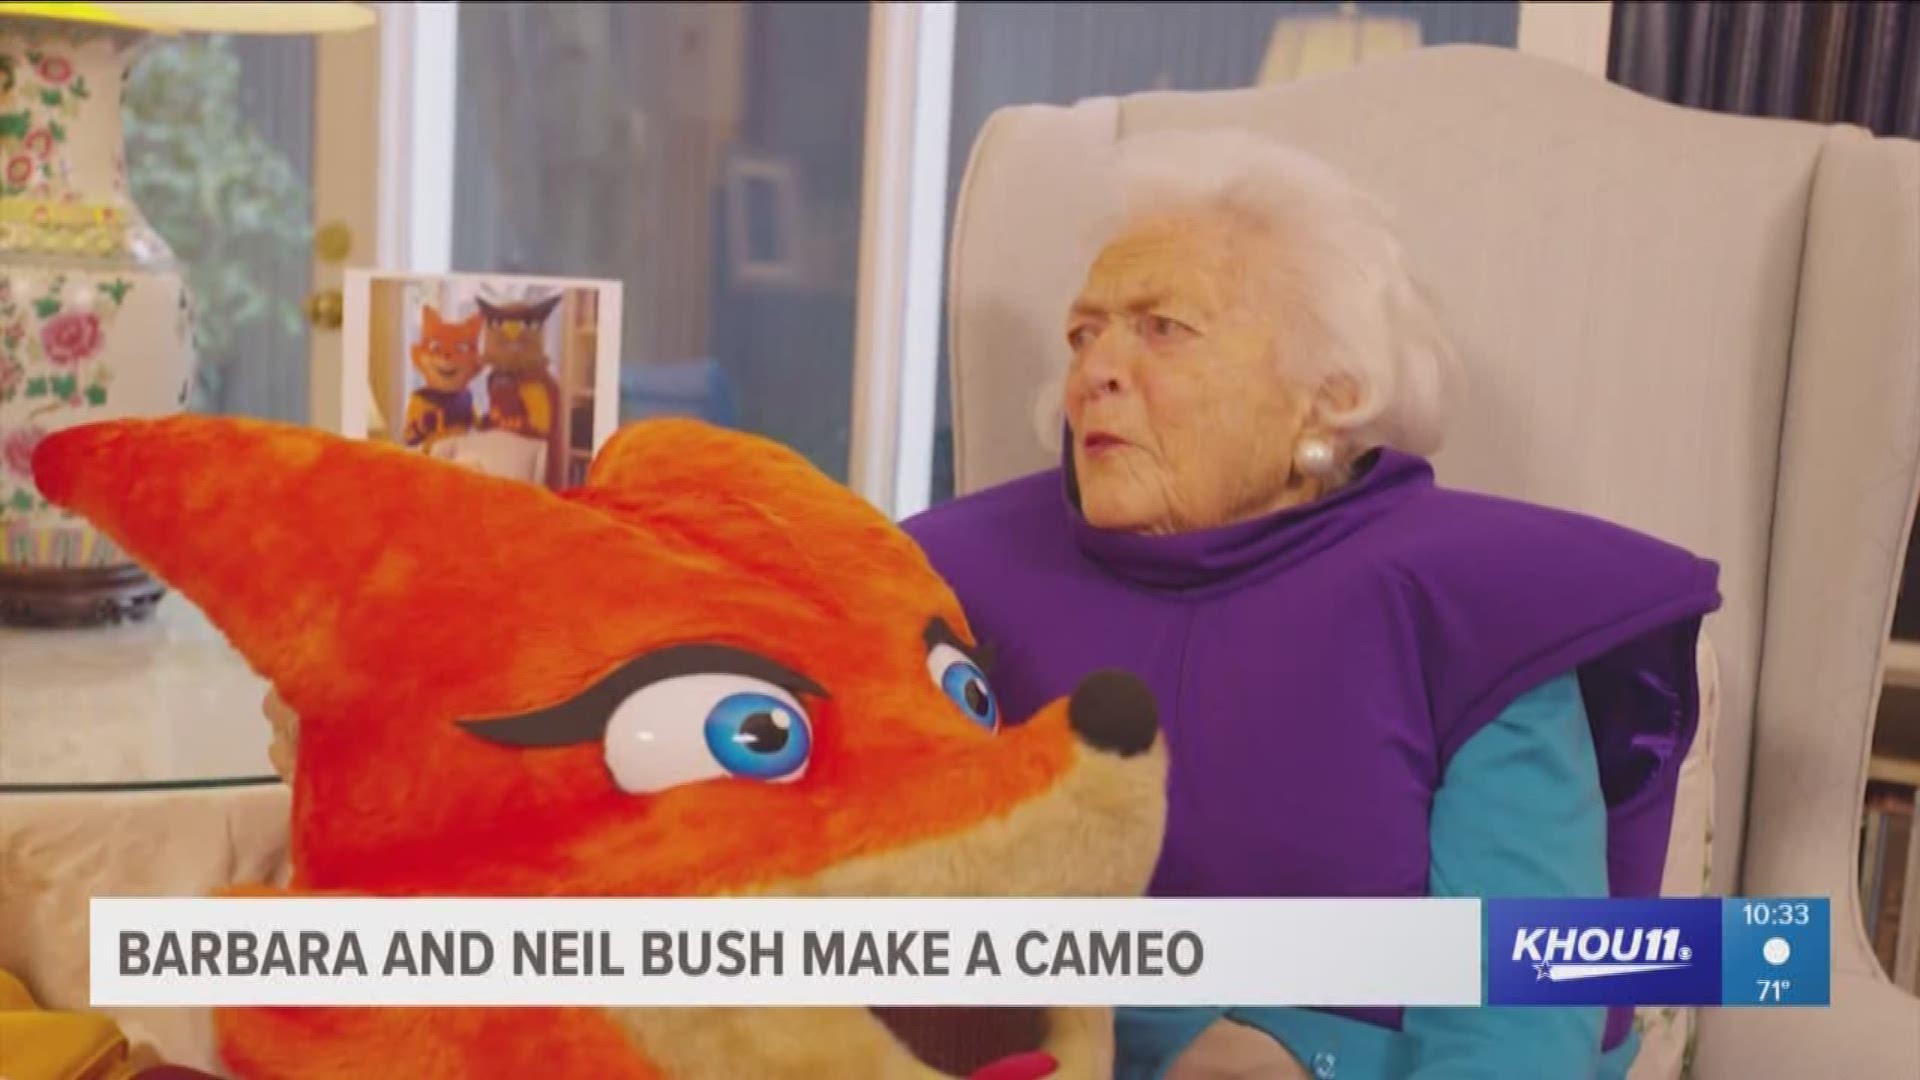 Barbara Bush was featured in a new campaign for her literacy foundation released just a few days after her death.